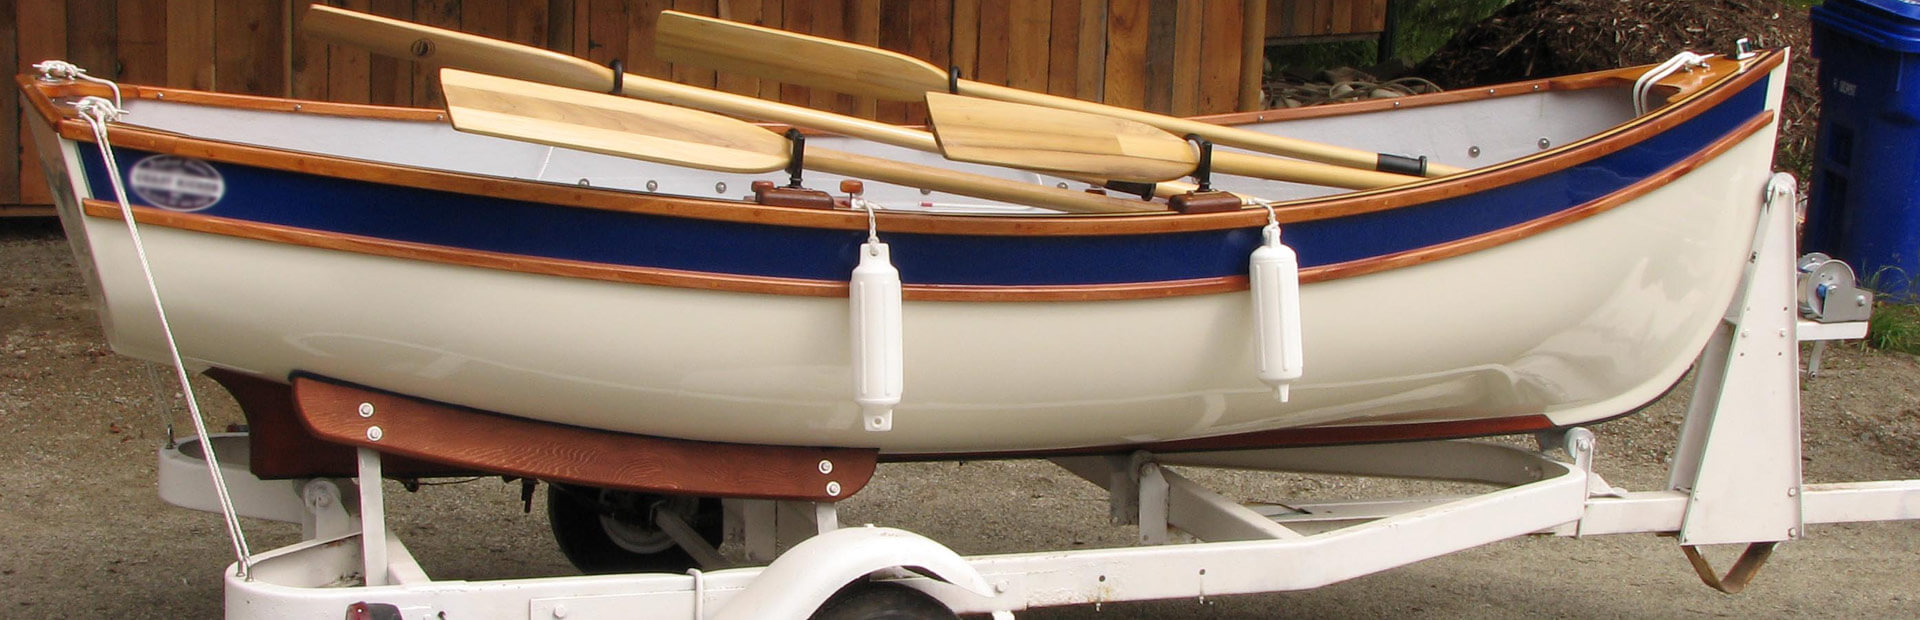 Donate Boat, Yacht or Jet Ski in Maine - Sailboat Donations Too!